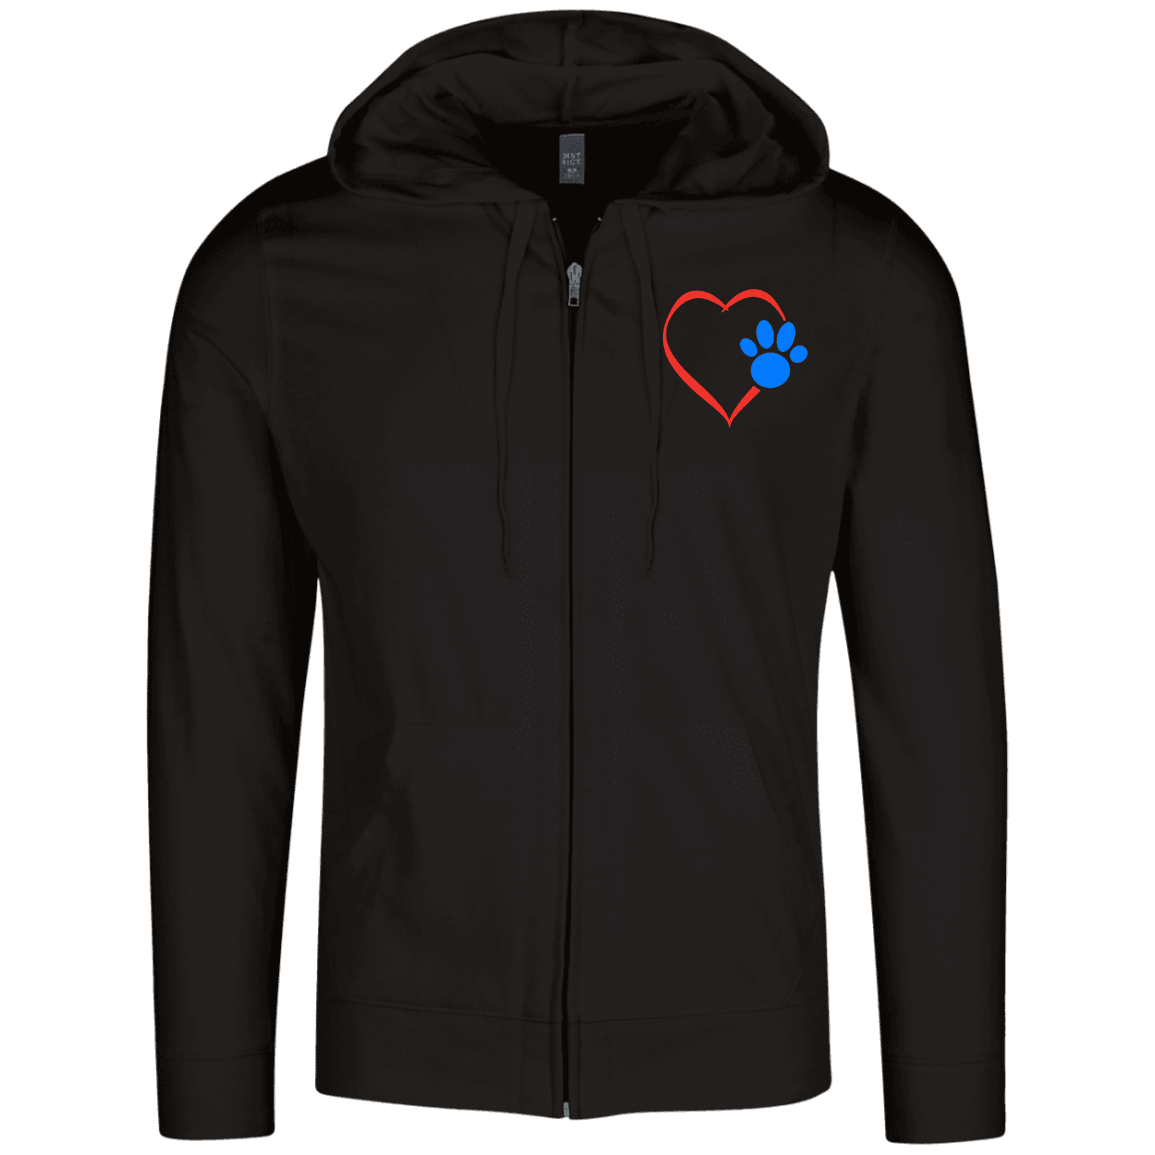 Designs by MyUtopia Shout Out:Heart w Blue Dog Paw Embroidered Lightweight Full Zip Hoodie,Black / X-Small,Sweatshirts